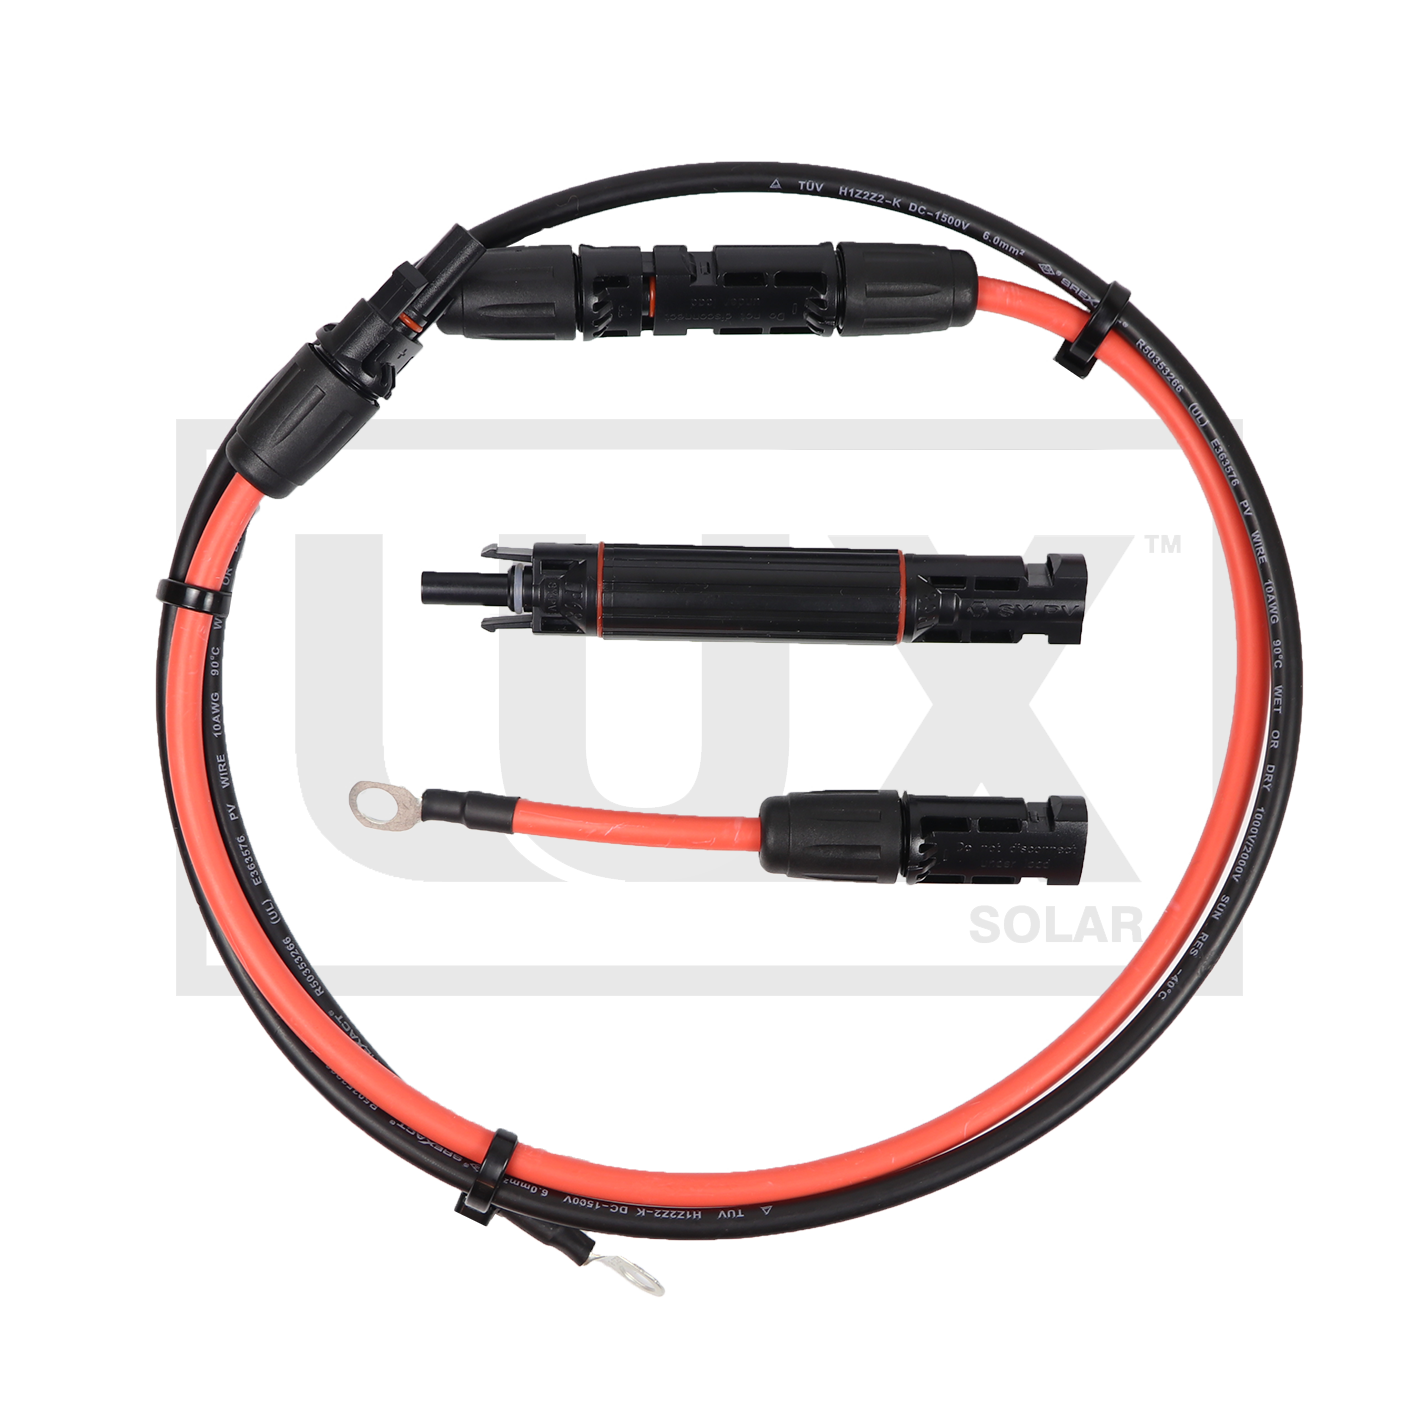 LUX Solar Red and Black Battery Cable with Inline Fuse holder and Solar Fuse